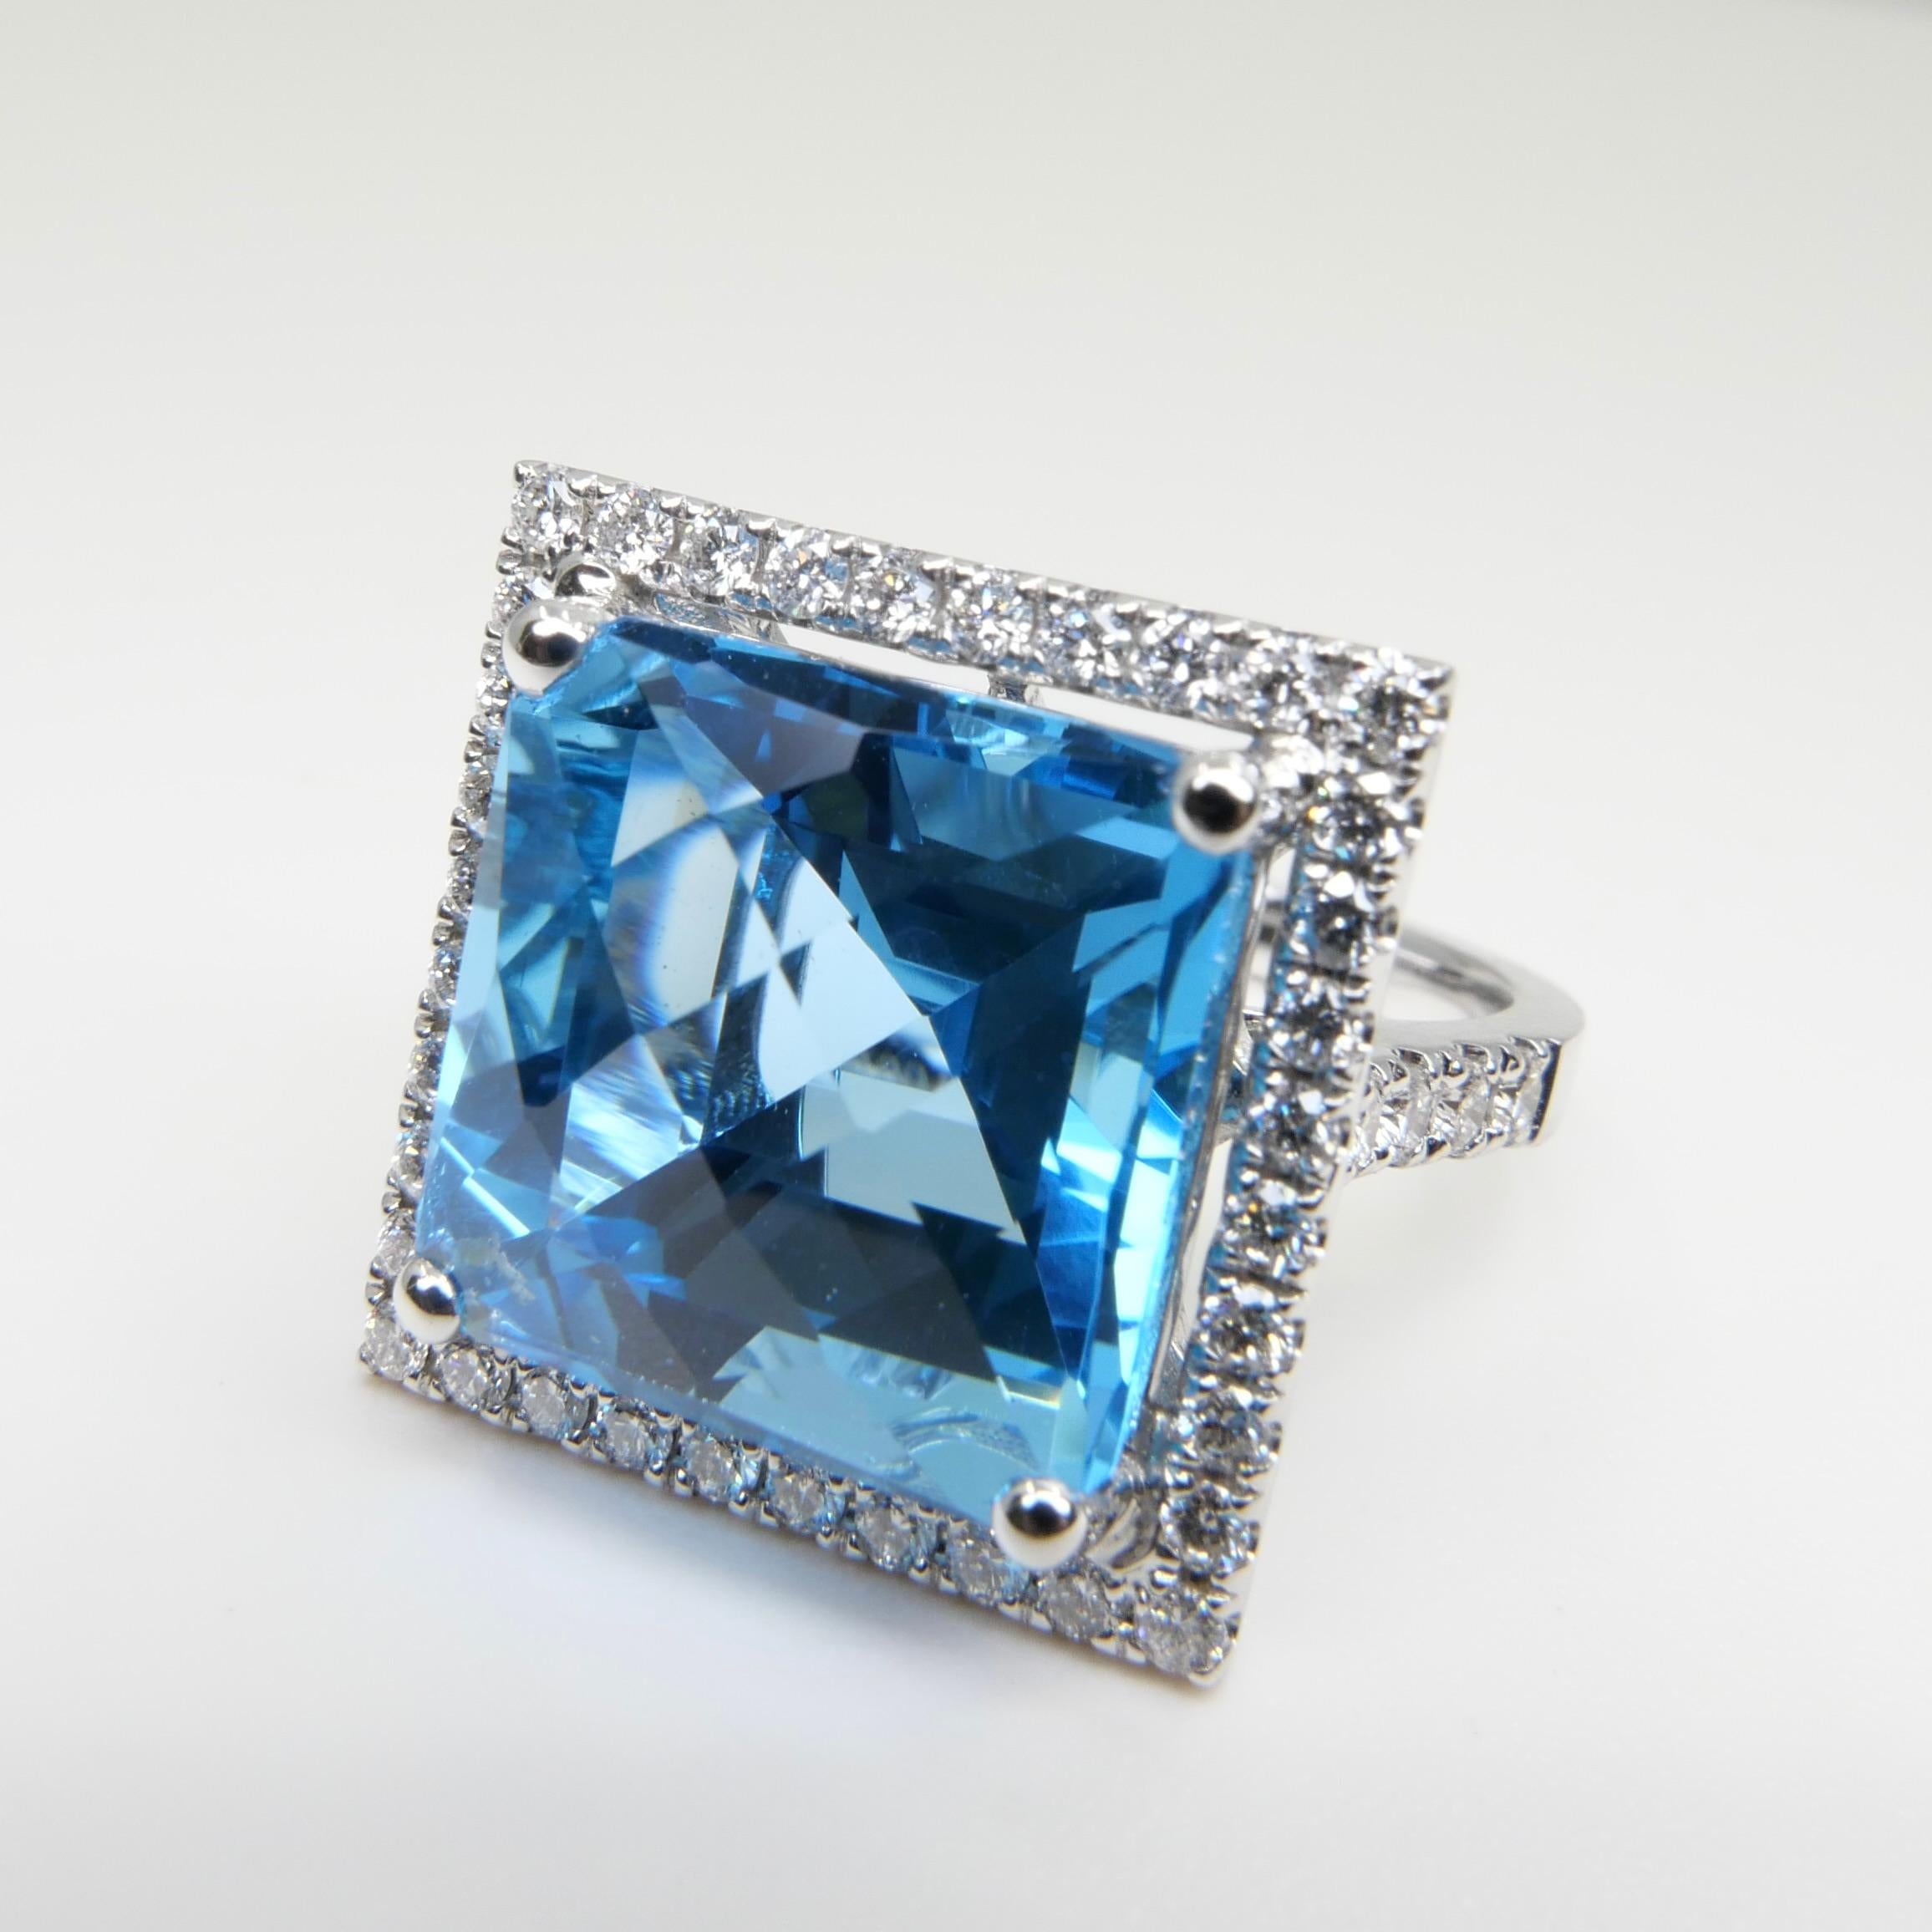  13 Cts checker Square Cut Blue Topaz & Diamond Cocktail Ring. Big Statement. For Sale 7